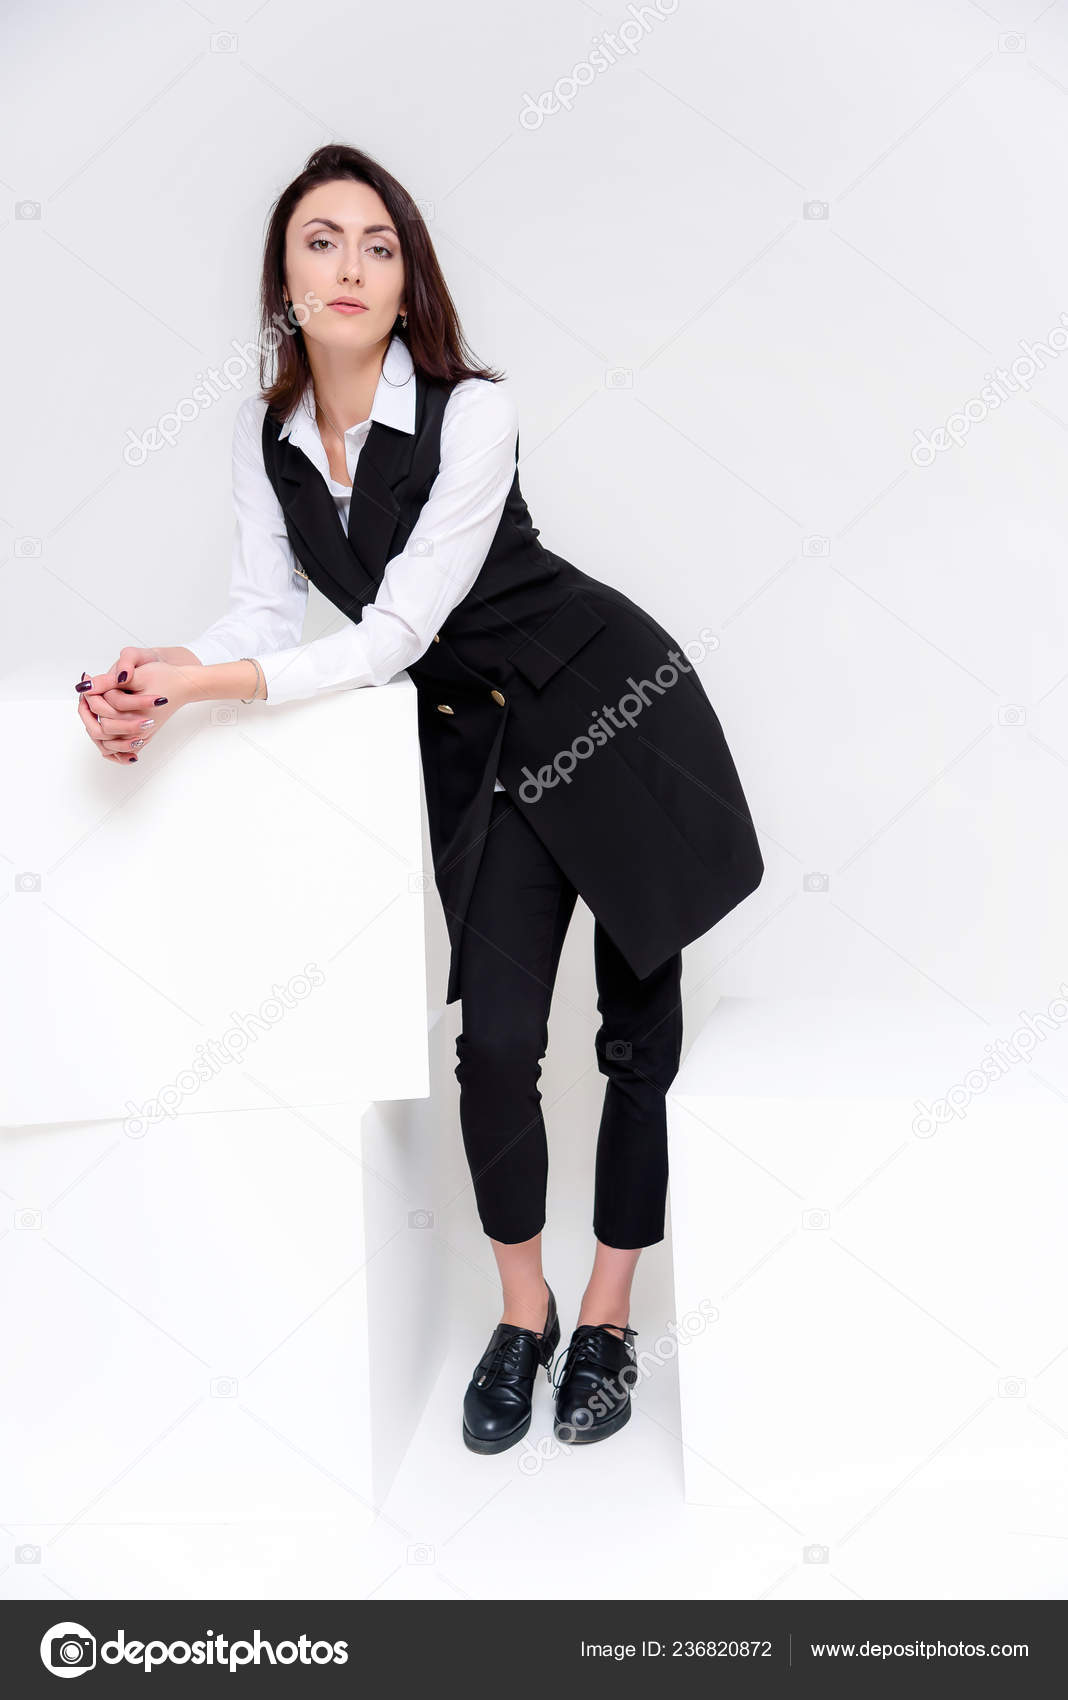 Concept Portrait Girl Standing White Background Business Suit Different Poses Stock Photo By C Govorkov Photo